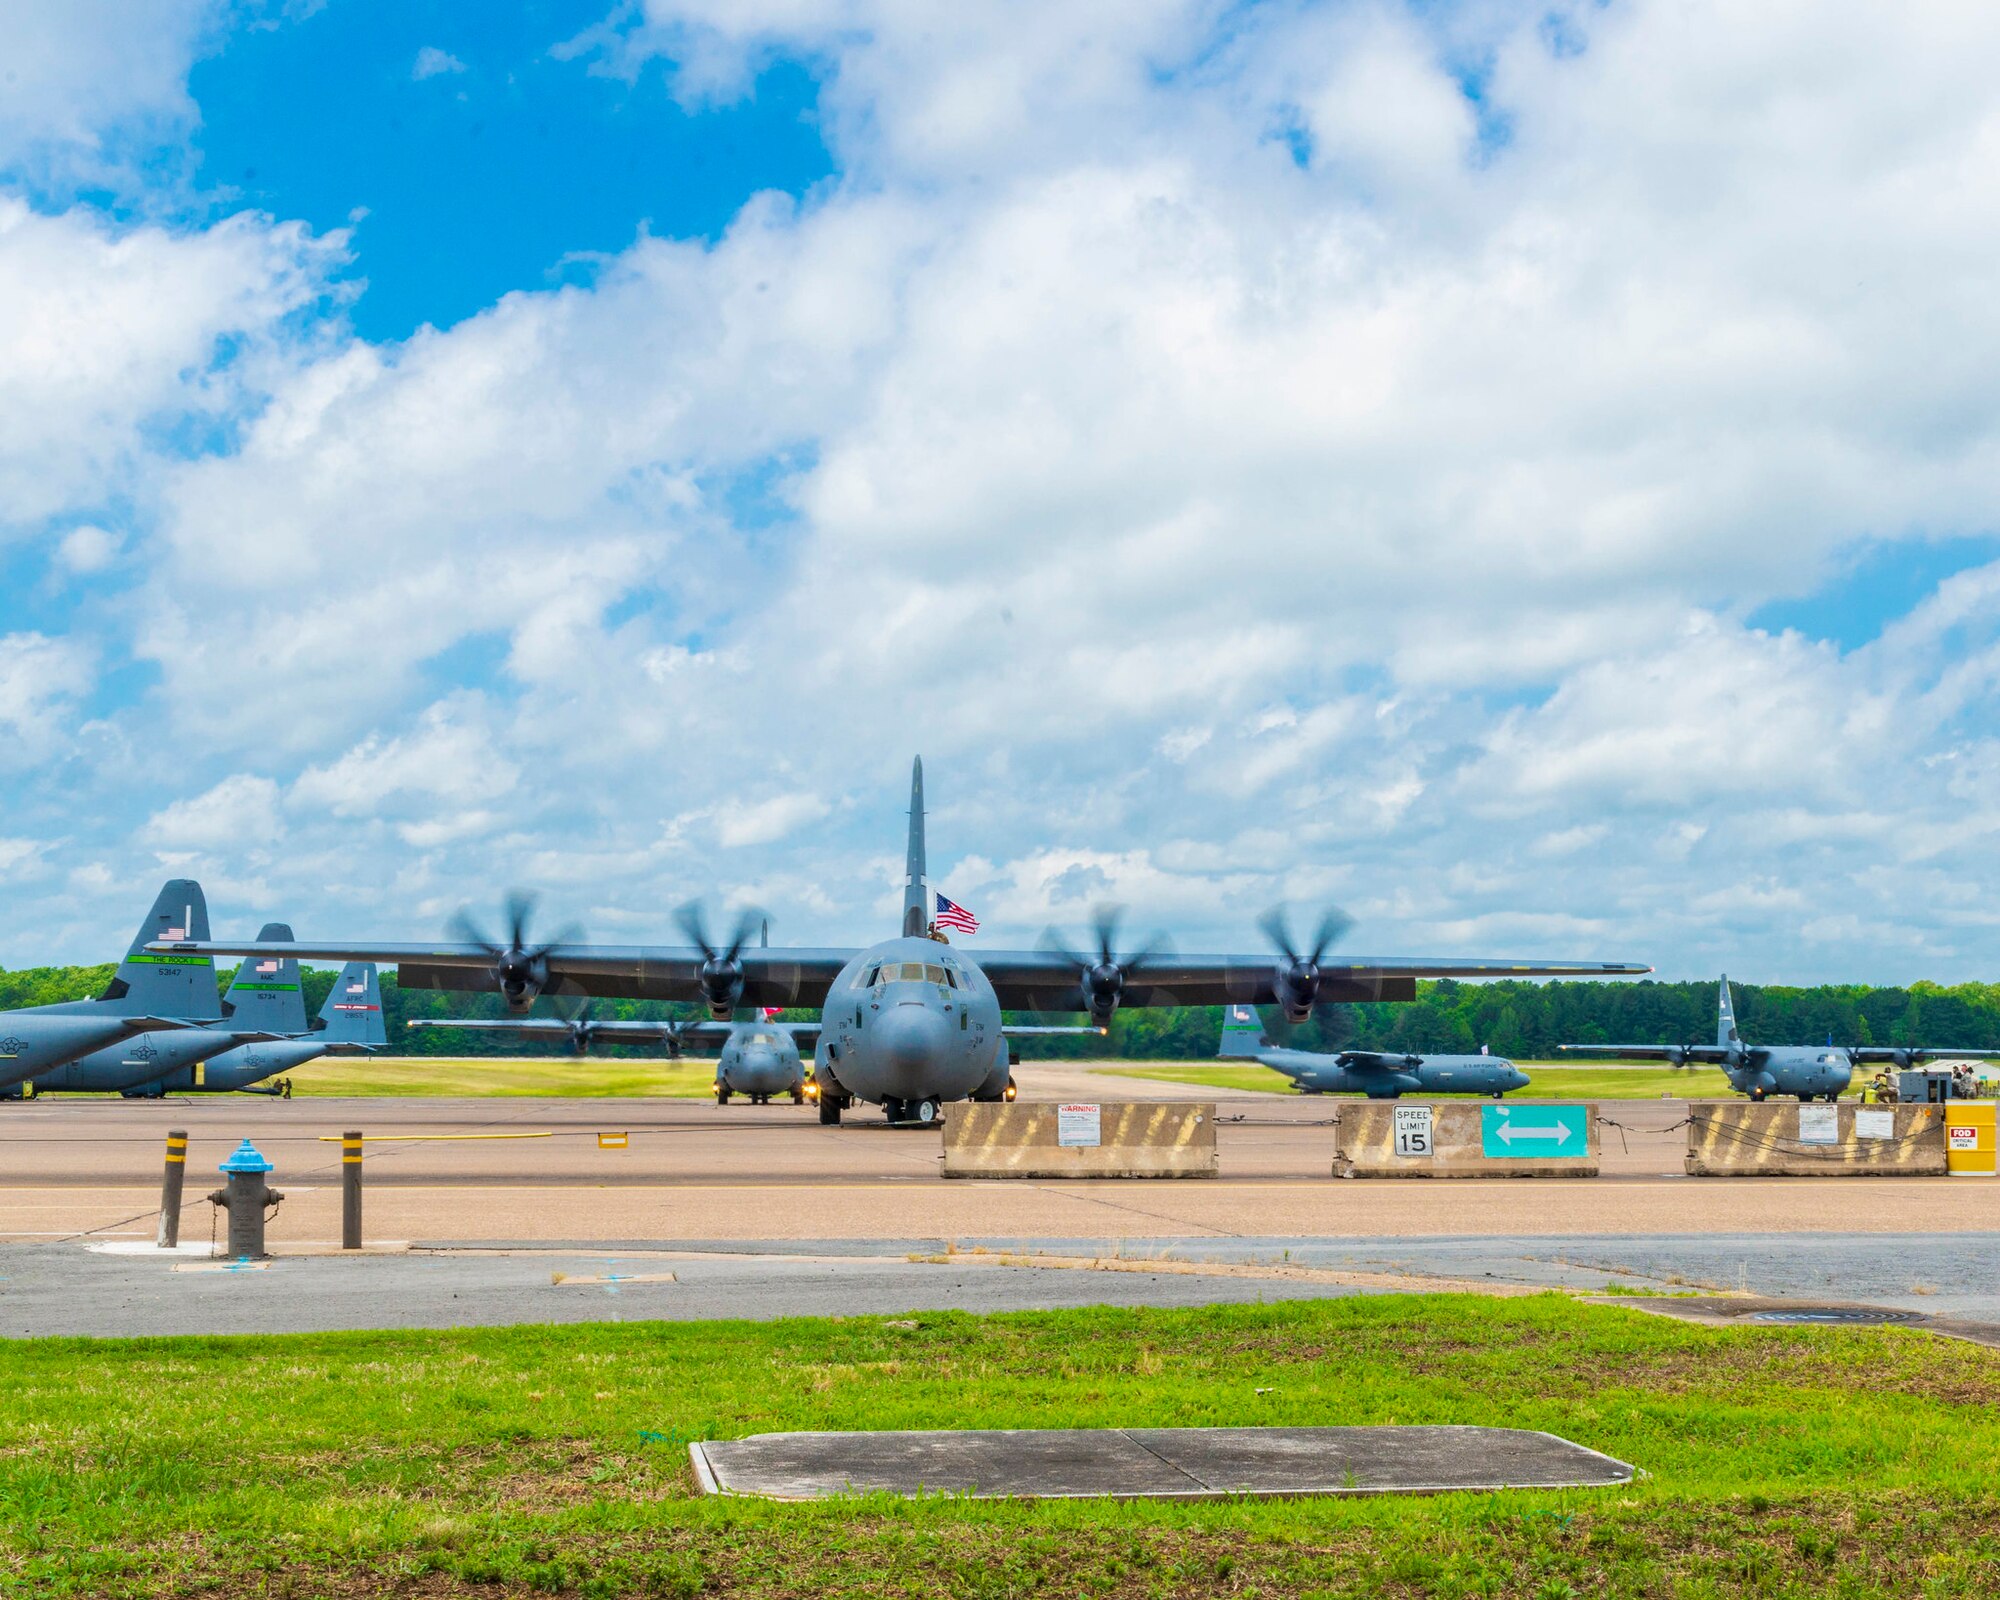 More than 100 Reserve Citizen Airmen from the 913th Airlift Group returned from deployment aboard C-130J on May 19, 2019, from various bases in Southwest Asia in support of Operations Freedom’s Sentinel and NATO’s Resolute Support.